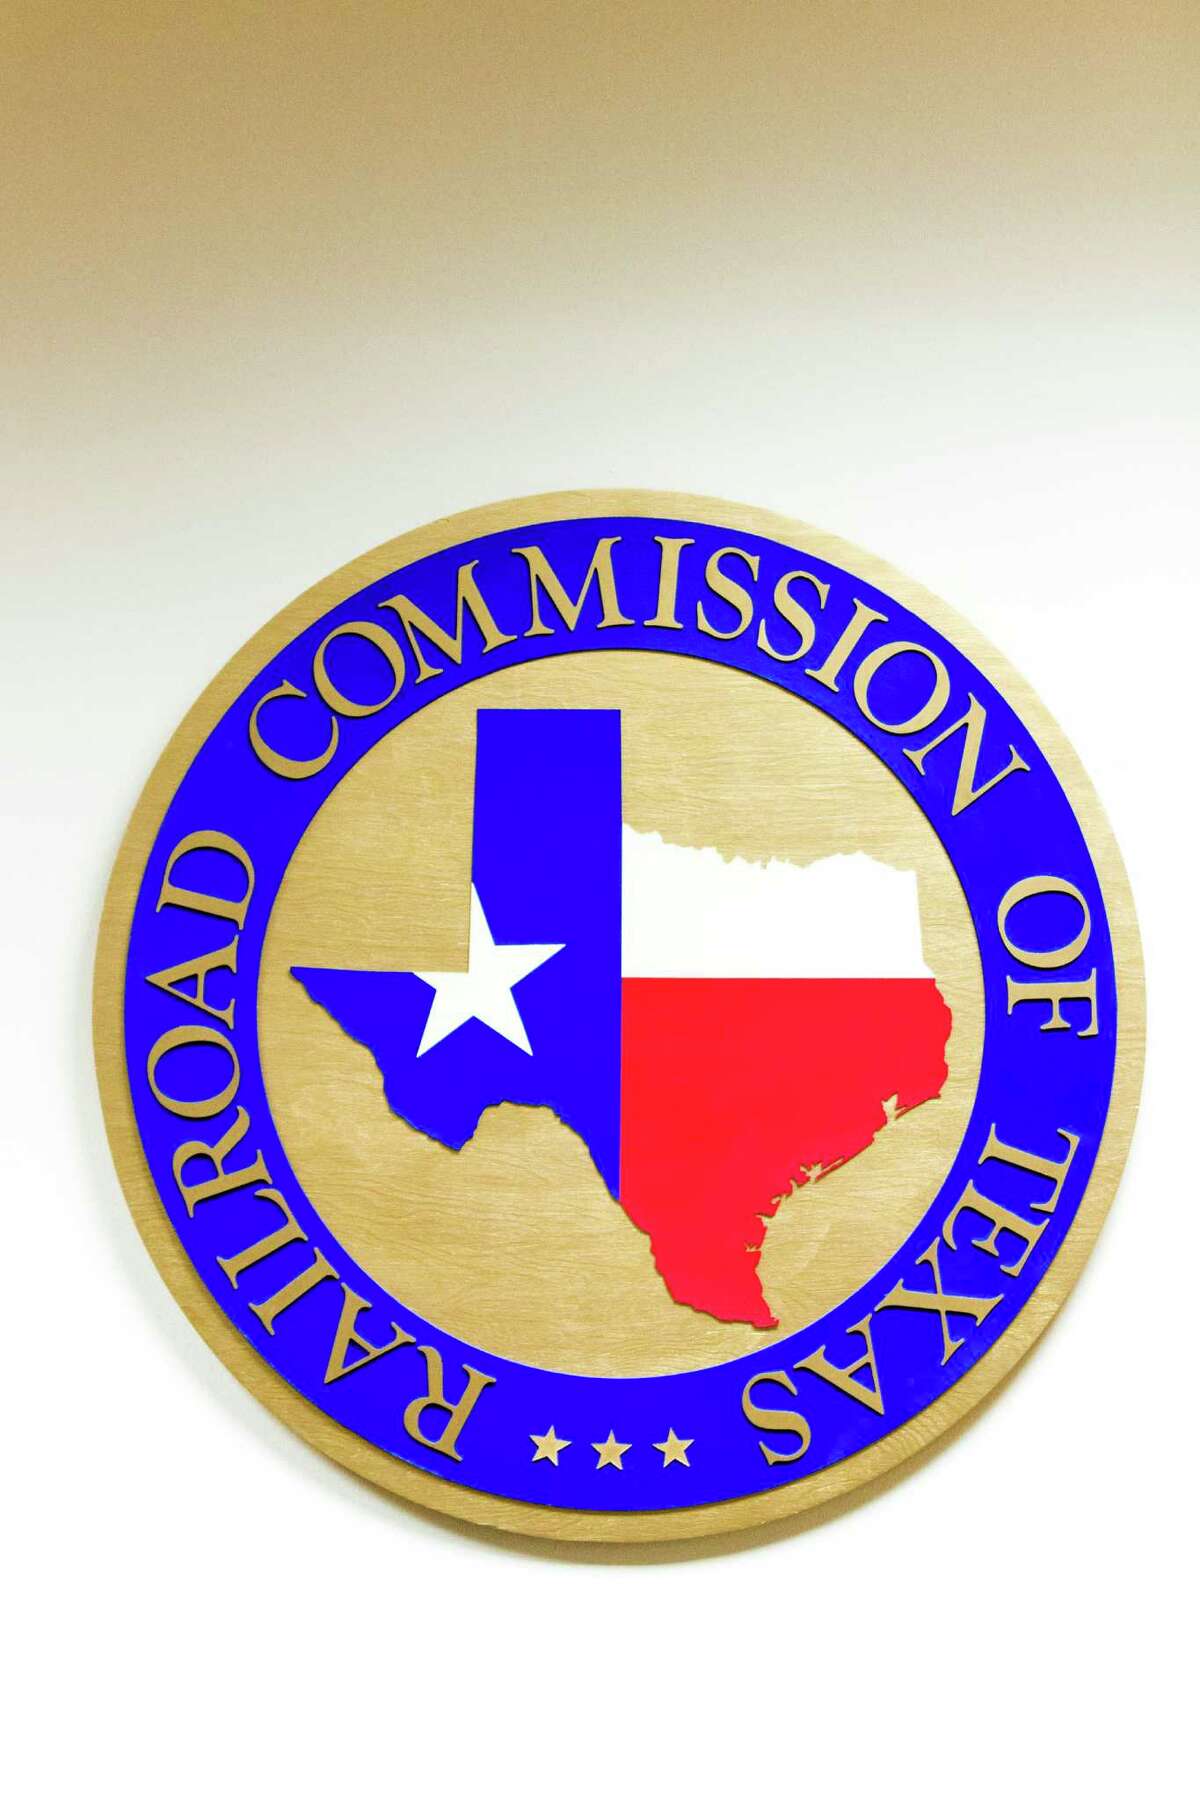 The Texas Railroad Commission's logo at its headquarters in Austin.